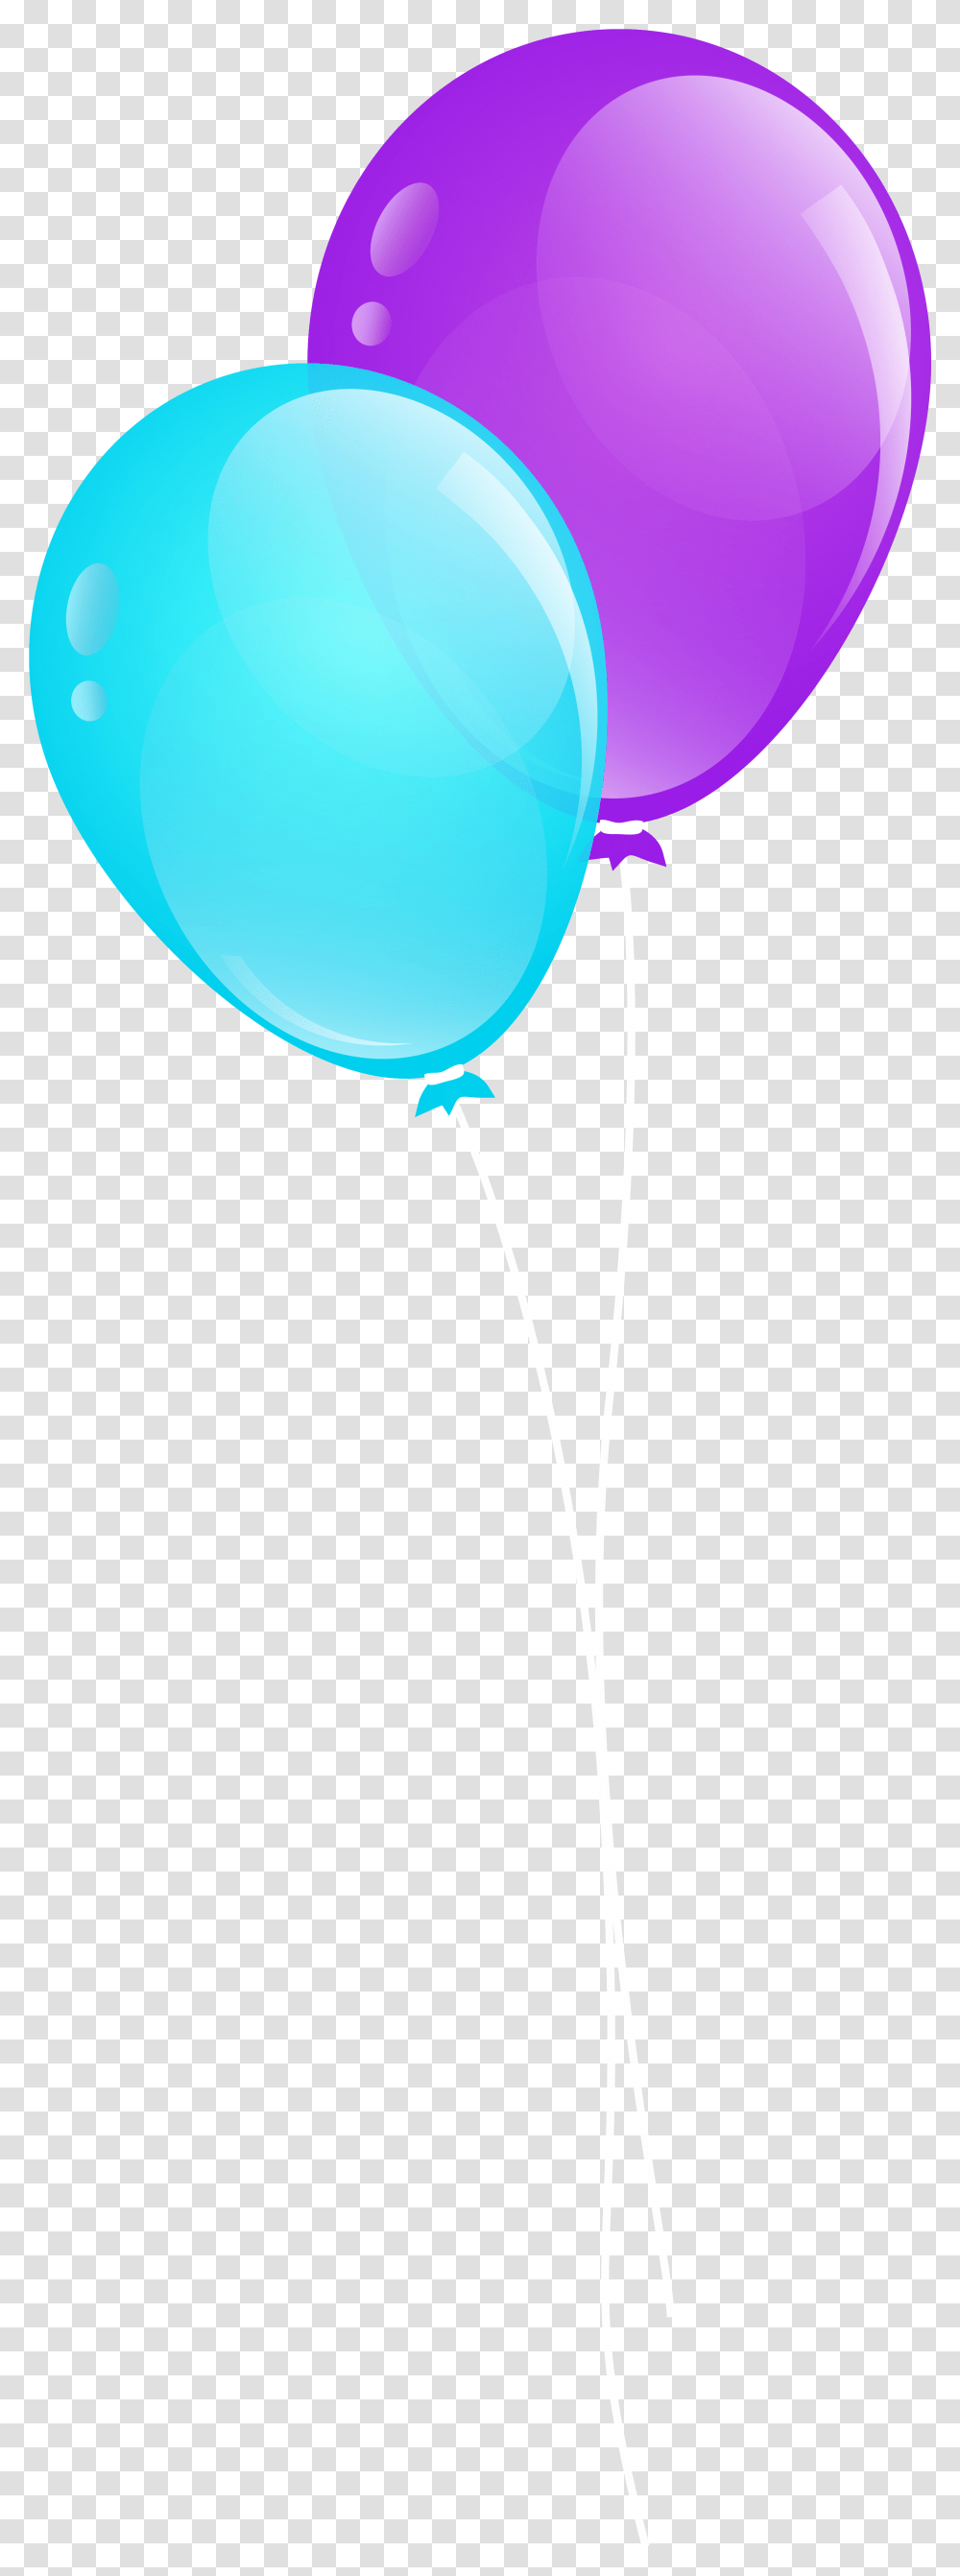 Download Hd Blue And Purple Balloons Clip Art Image Purple Blue And Purple Balloons Transparent Png